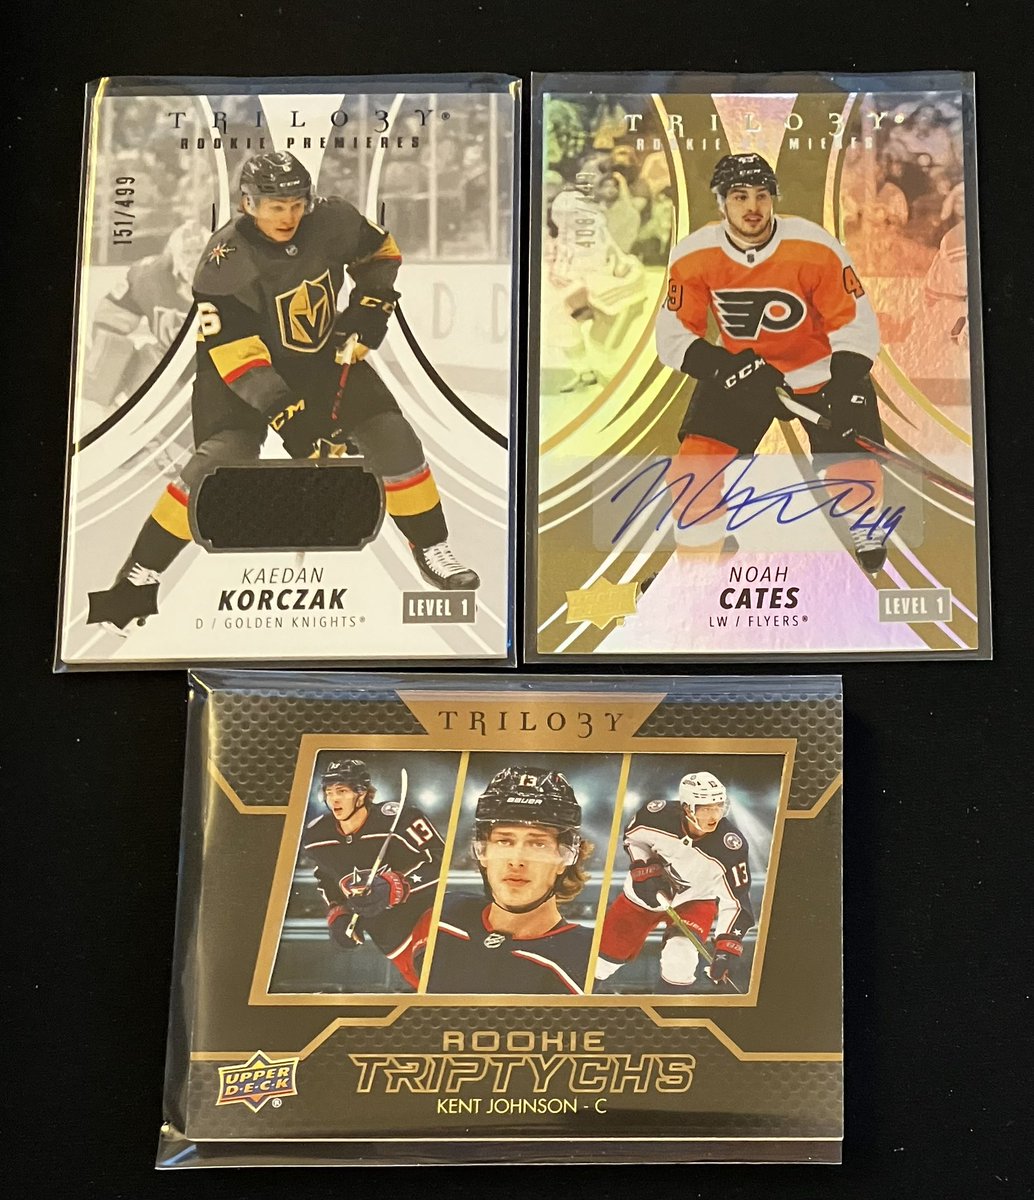 Let’s do an @UpperDeckSports giveaway!

You can win three hits from a hobby box of 2022-23 Trilogy.  

To enter, all you have to do is follow me, reply with a friend who might be interested, and retweet this tweet!  

Winner will be drawn Friday June 23rd. #hockeycards #thehobby